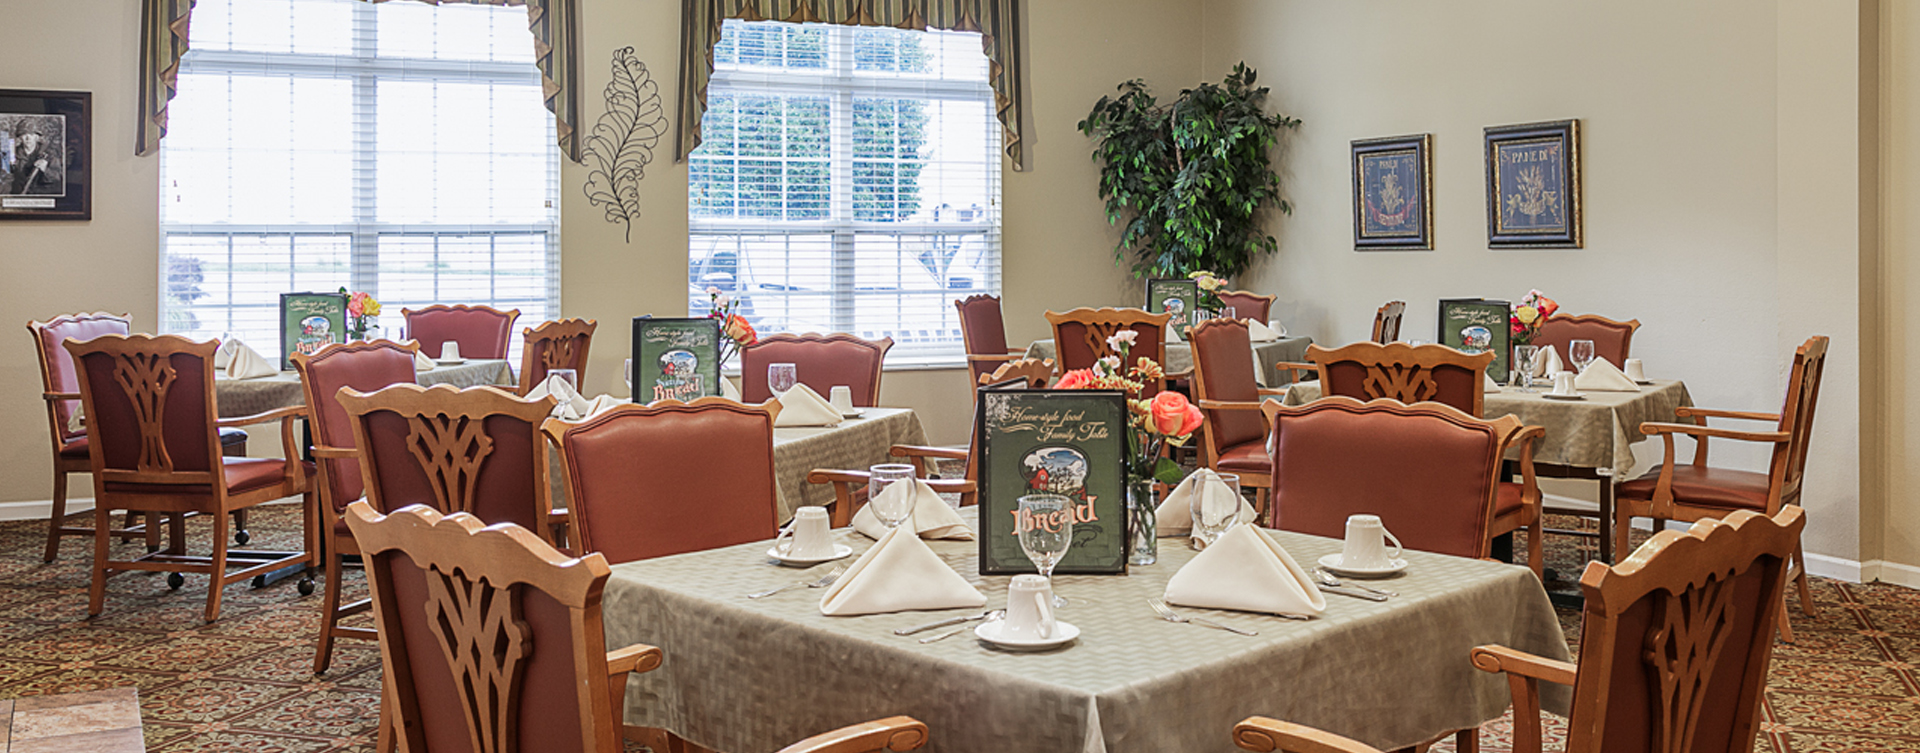 Enjoy restaurant -style meals served three times a day in our dining room at Bickford of Omaha - Hickory